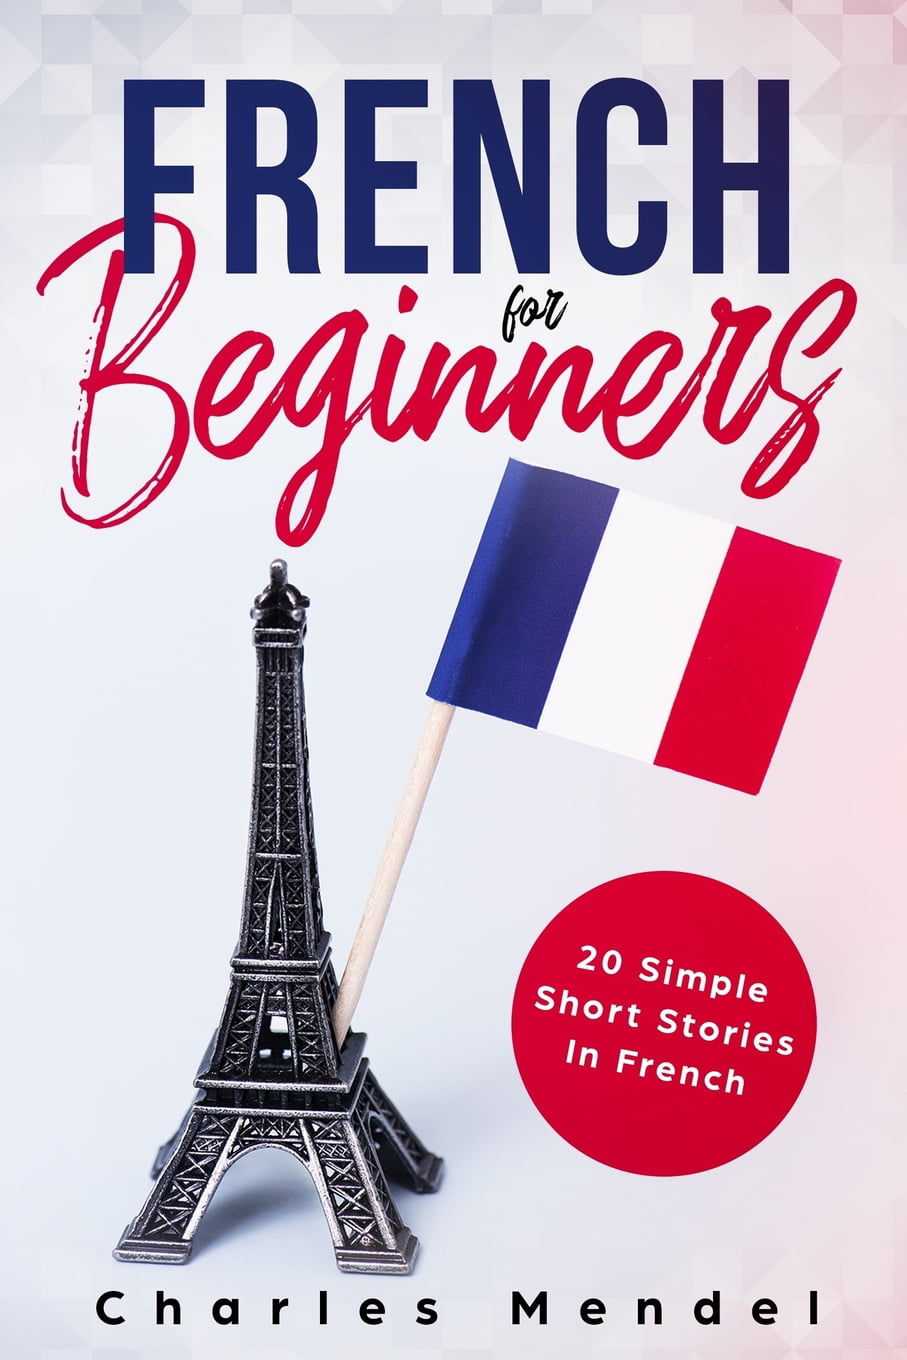 Easy to read french books